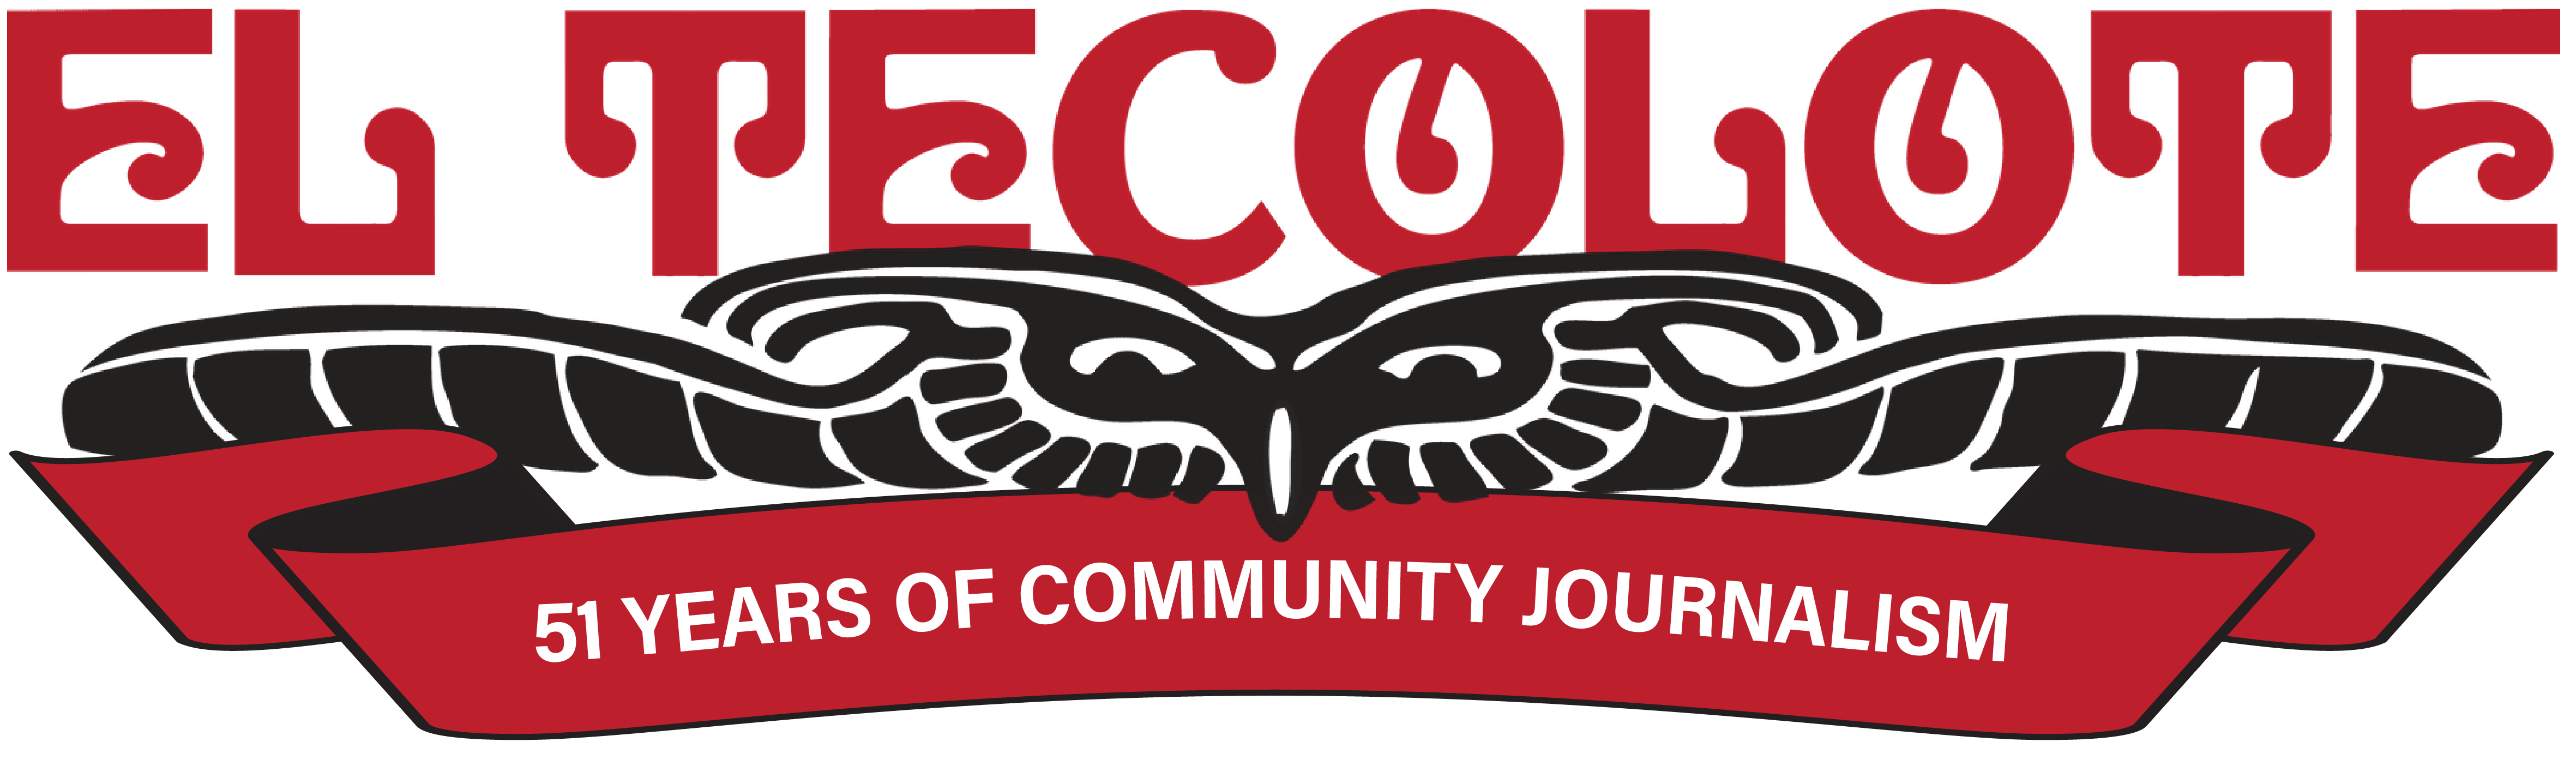 El Tecolote graphic, red and black with 51 years of community journalism quote